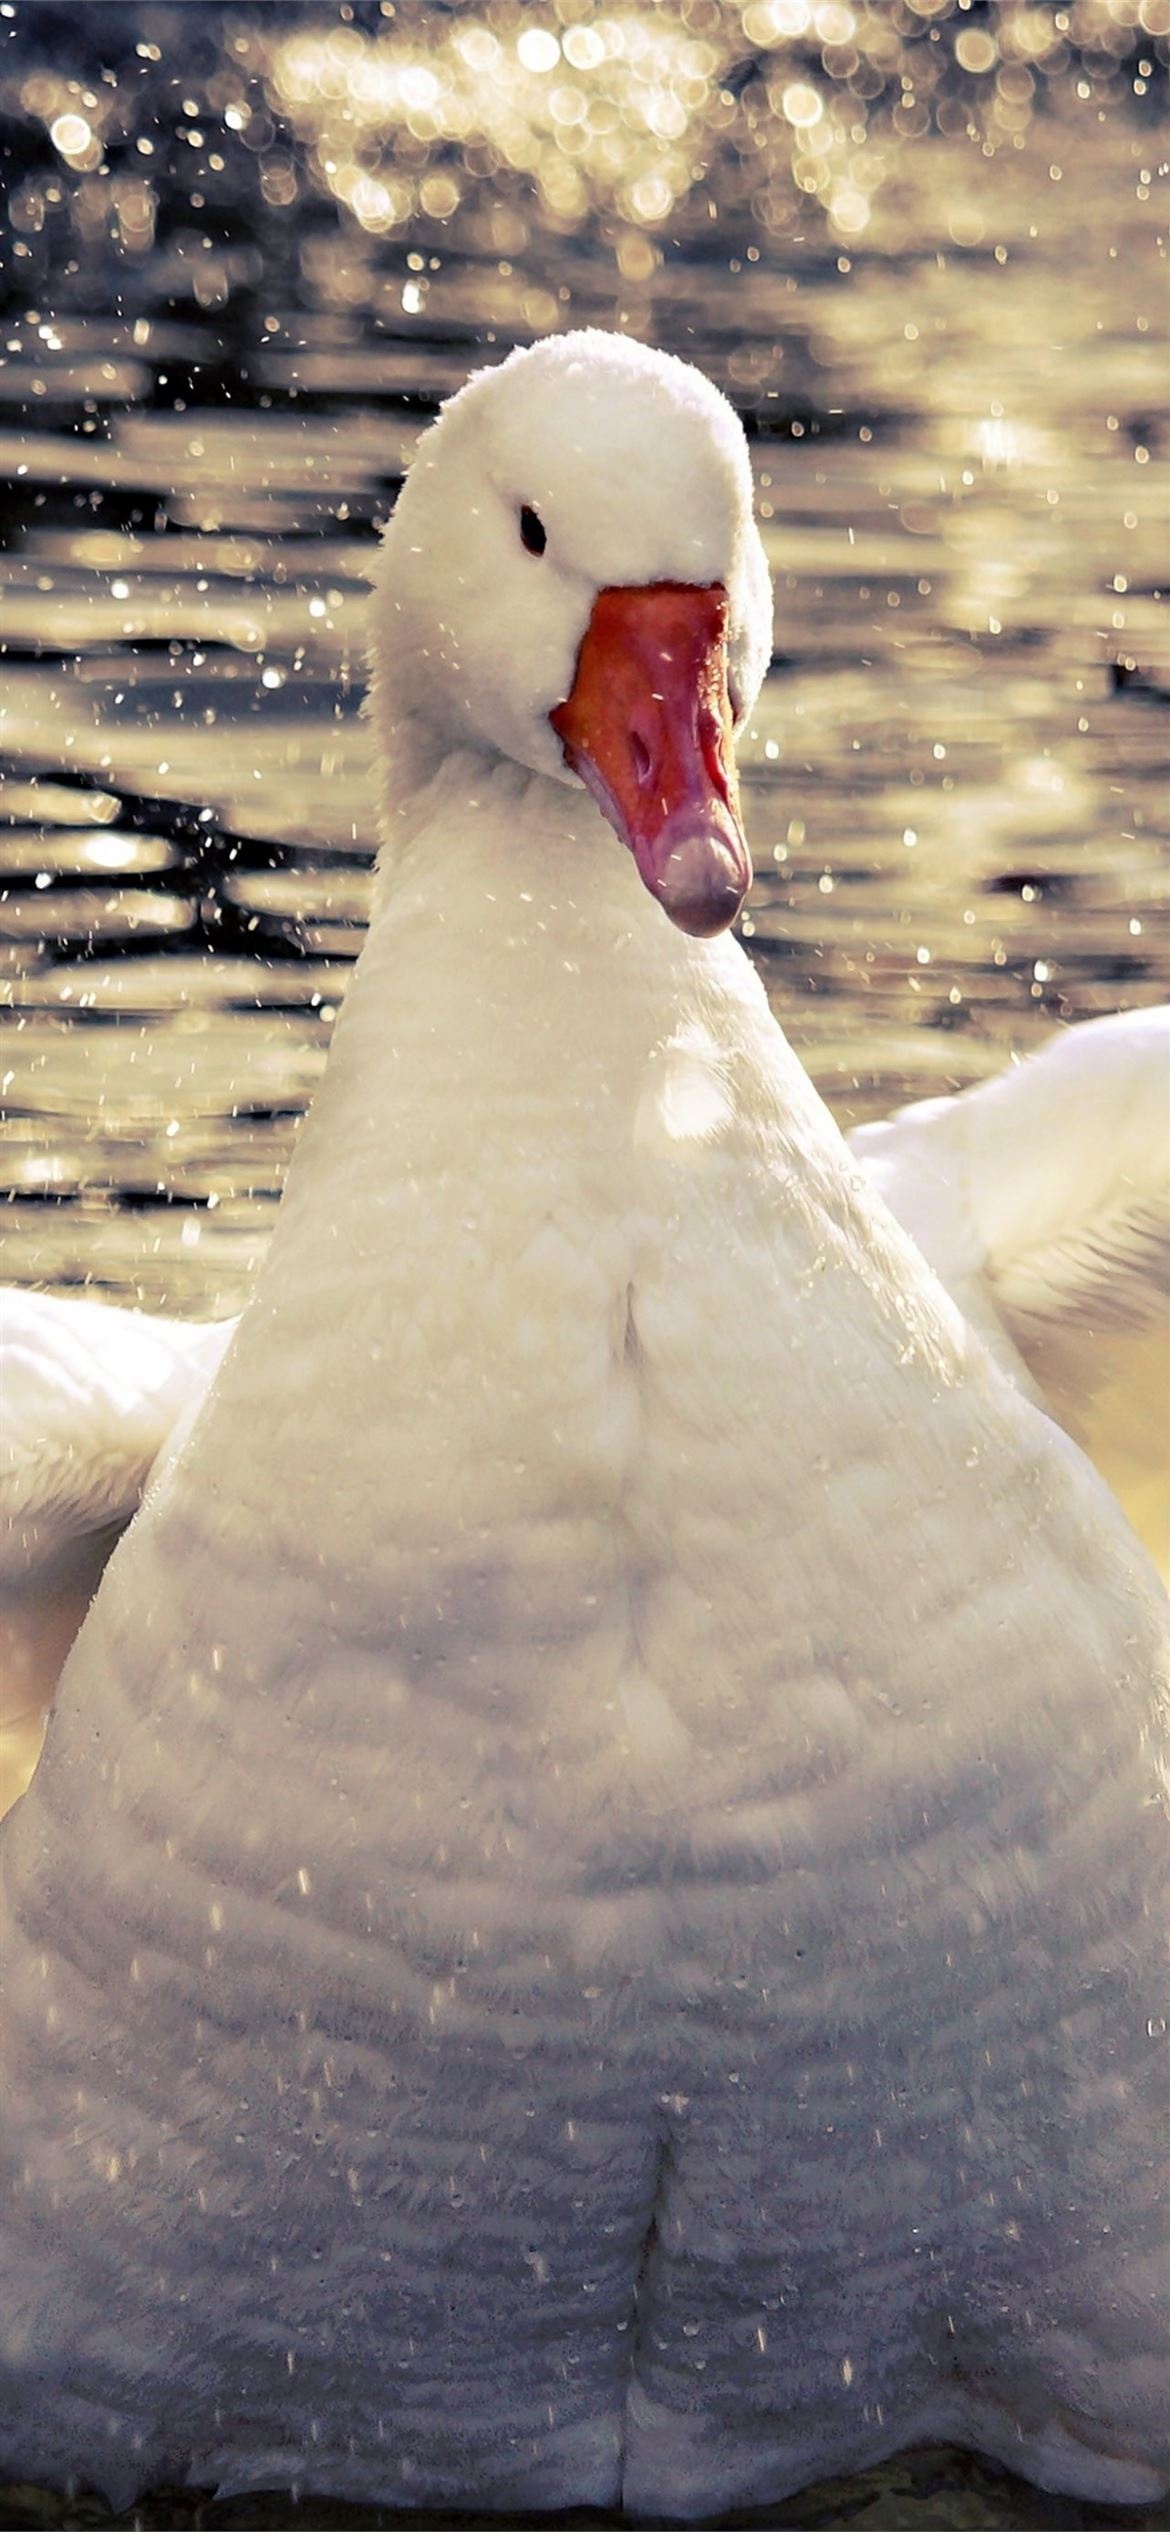 Goose wallpapers, iPhone backgrounds, Free downloads, HD quality, 1170x2540 HD Handy